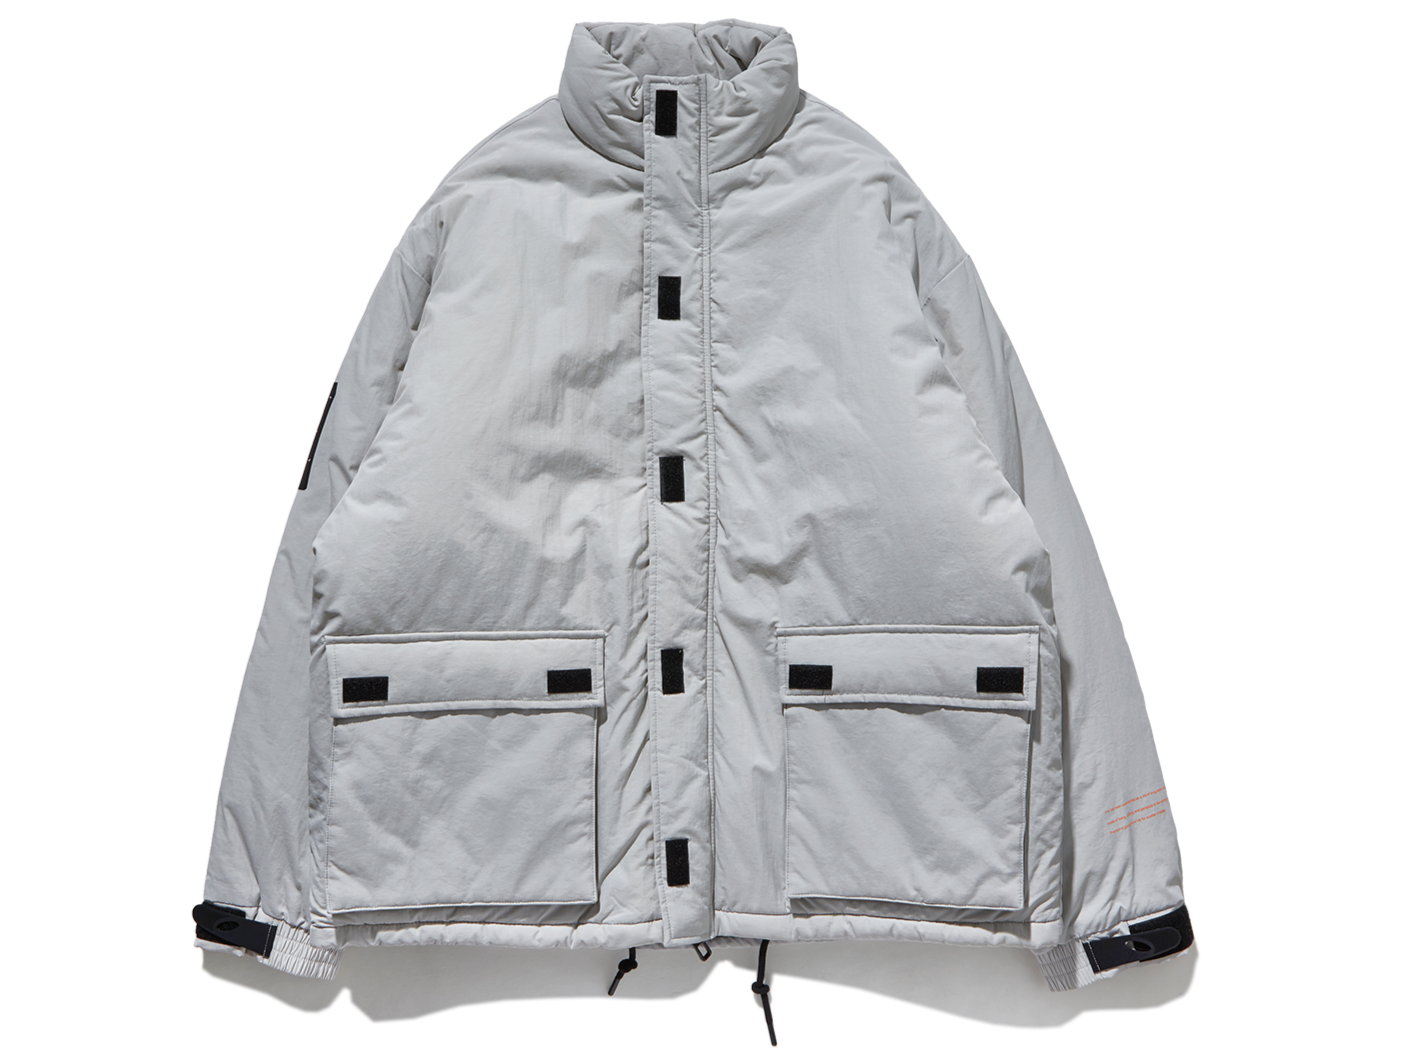 Grey Padded Puffer Jacket with Large Pockets